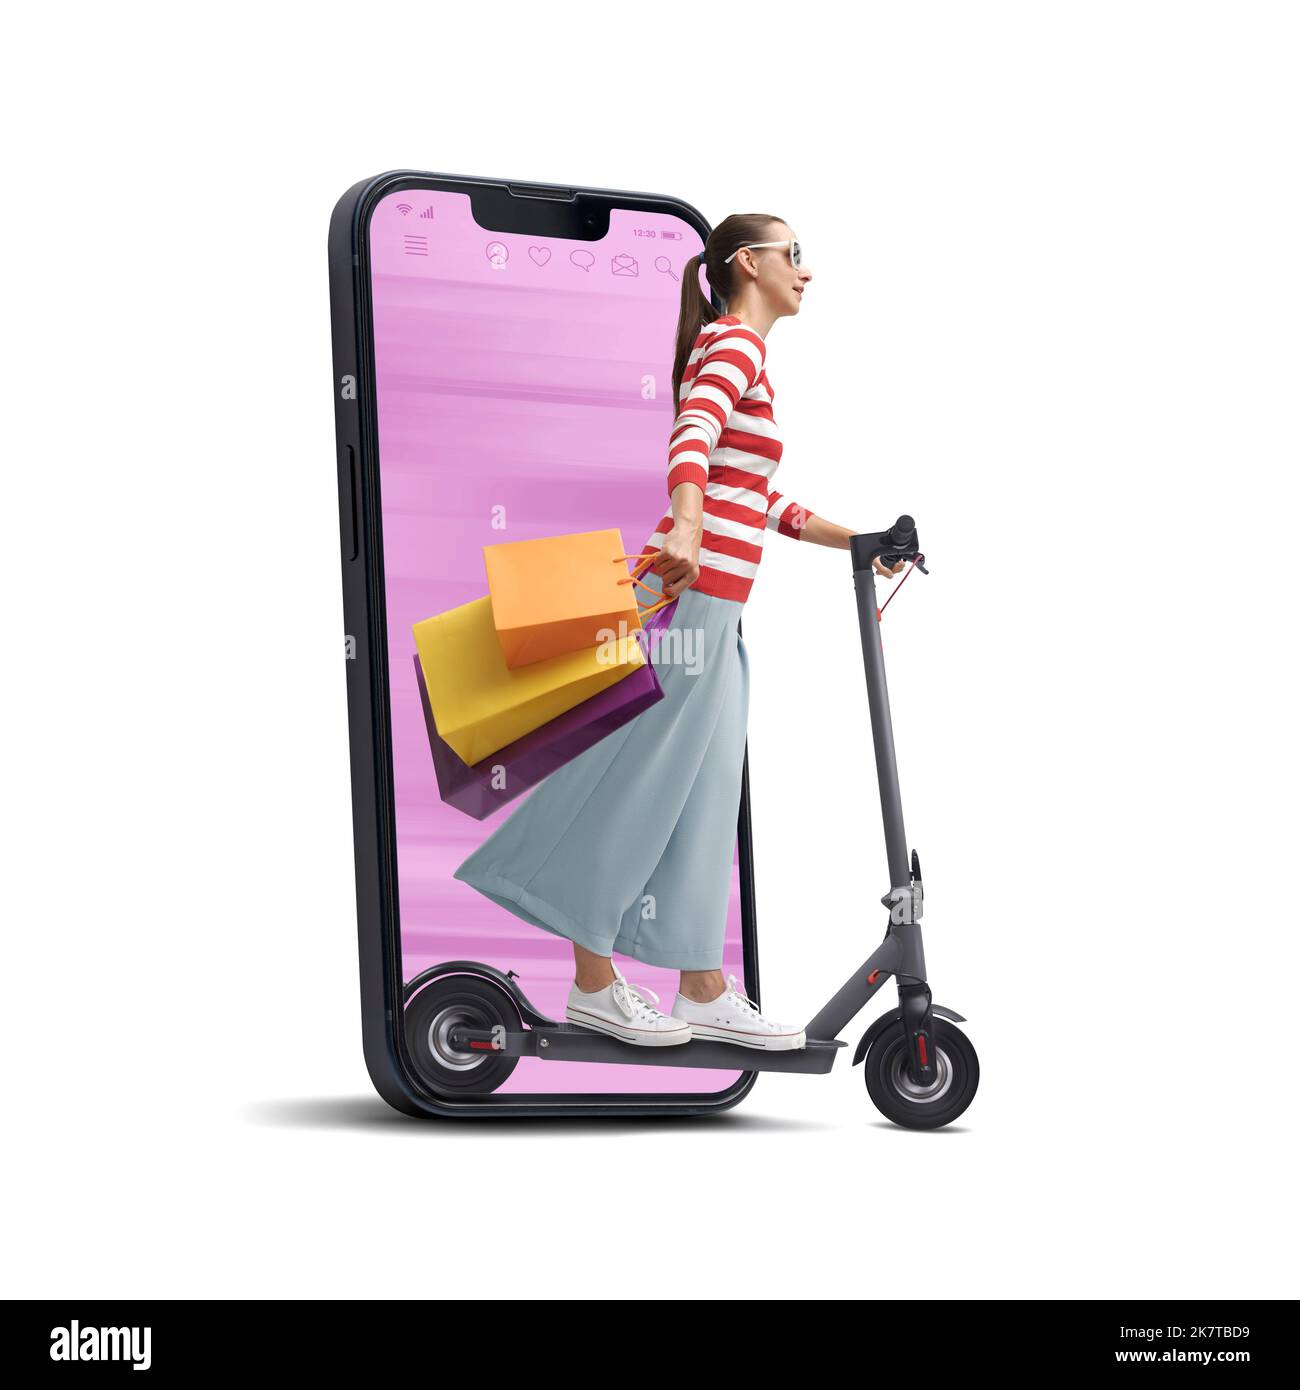 Woman holding many shopping bags and riding an electric scooter, she is coming out from a smartphone screen, online shopping and sales concept, white Stock Photo